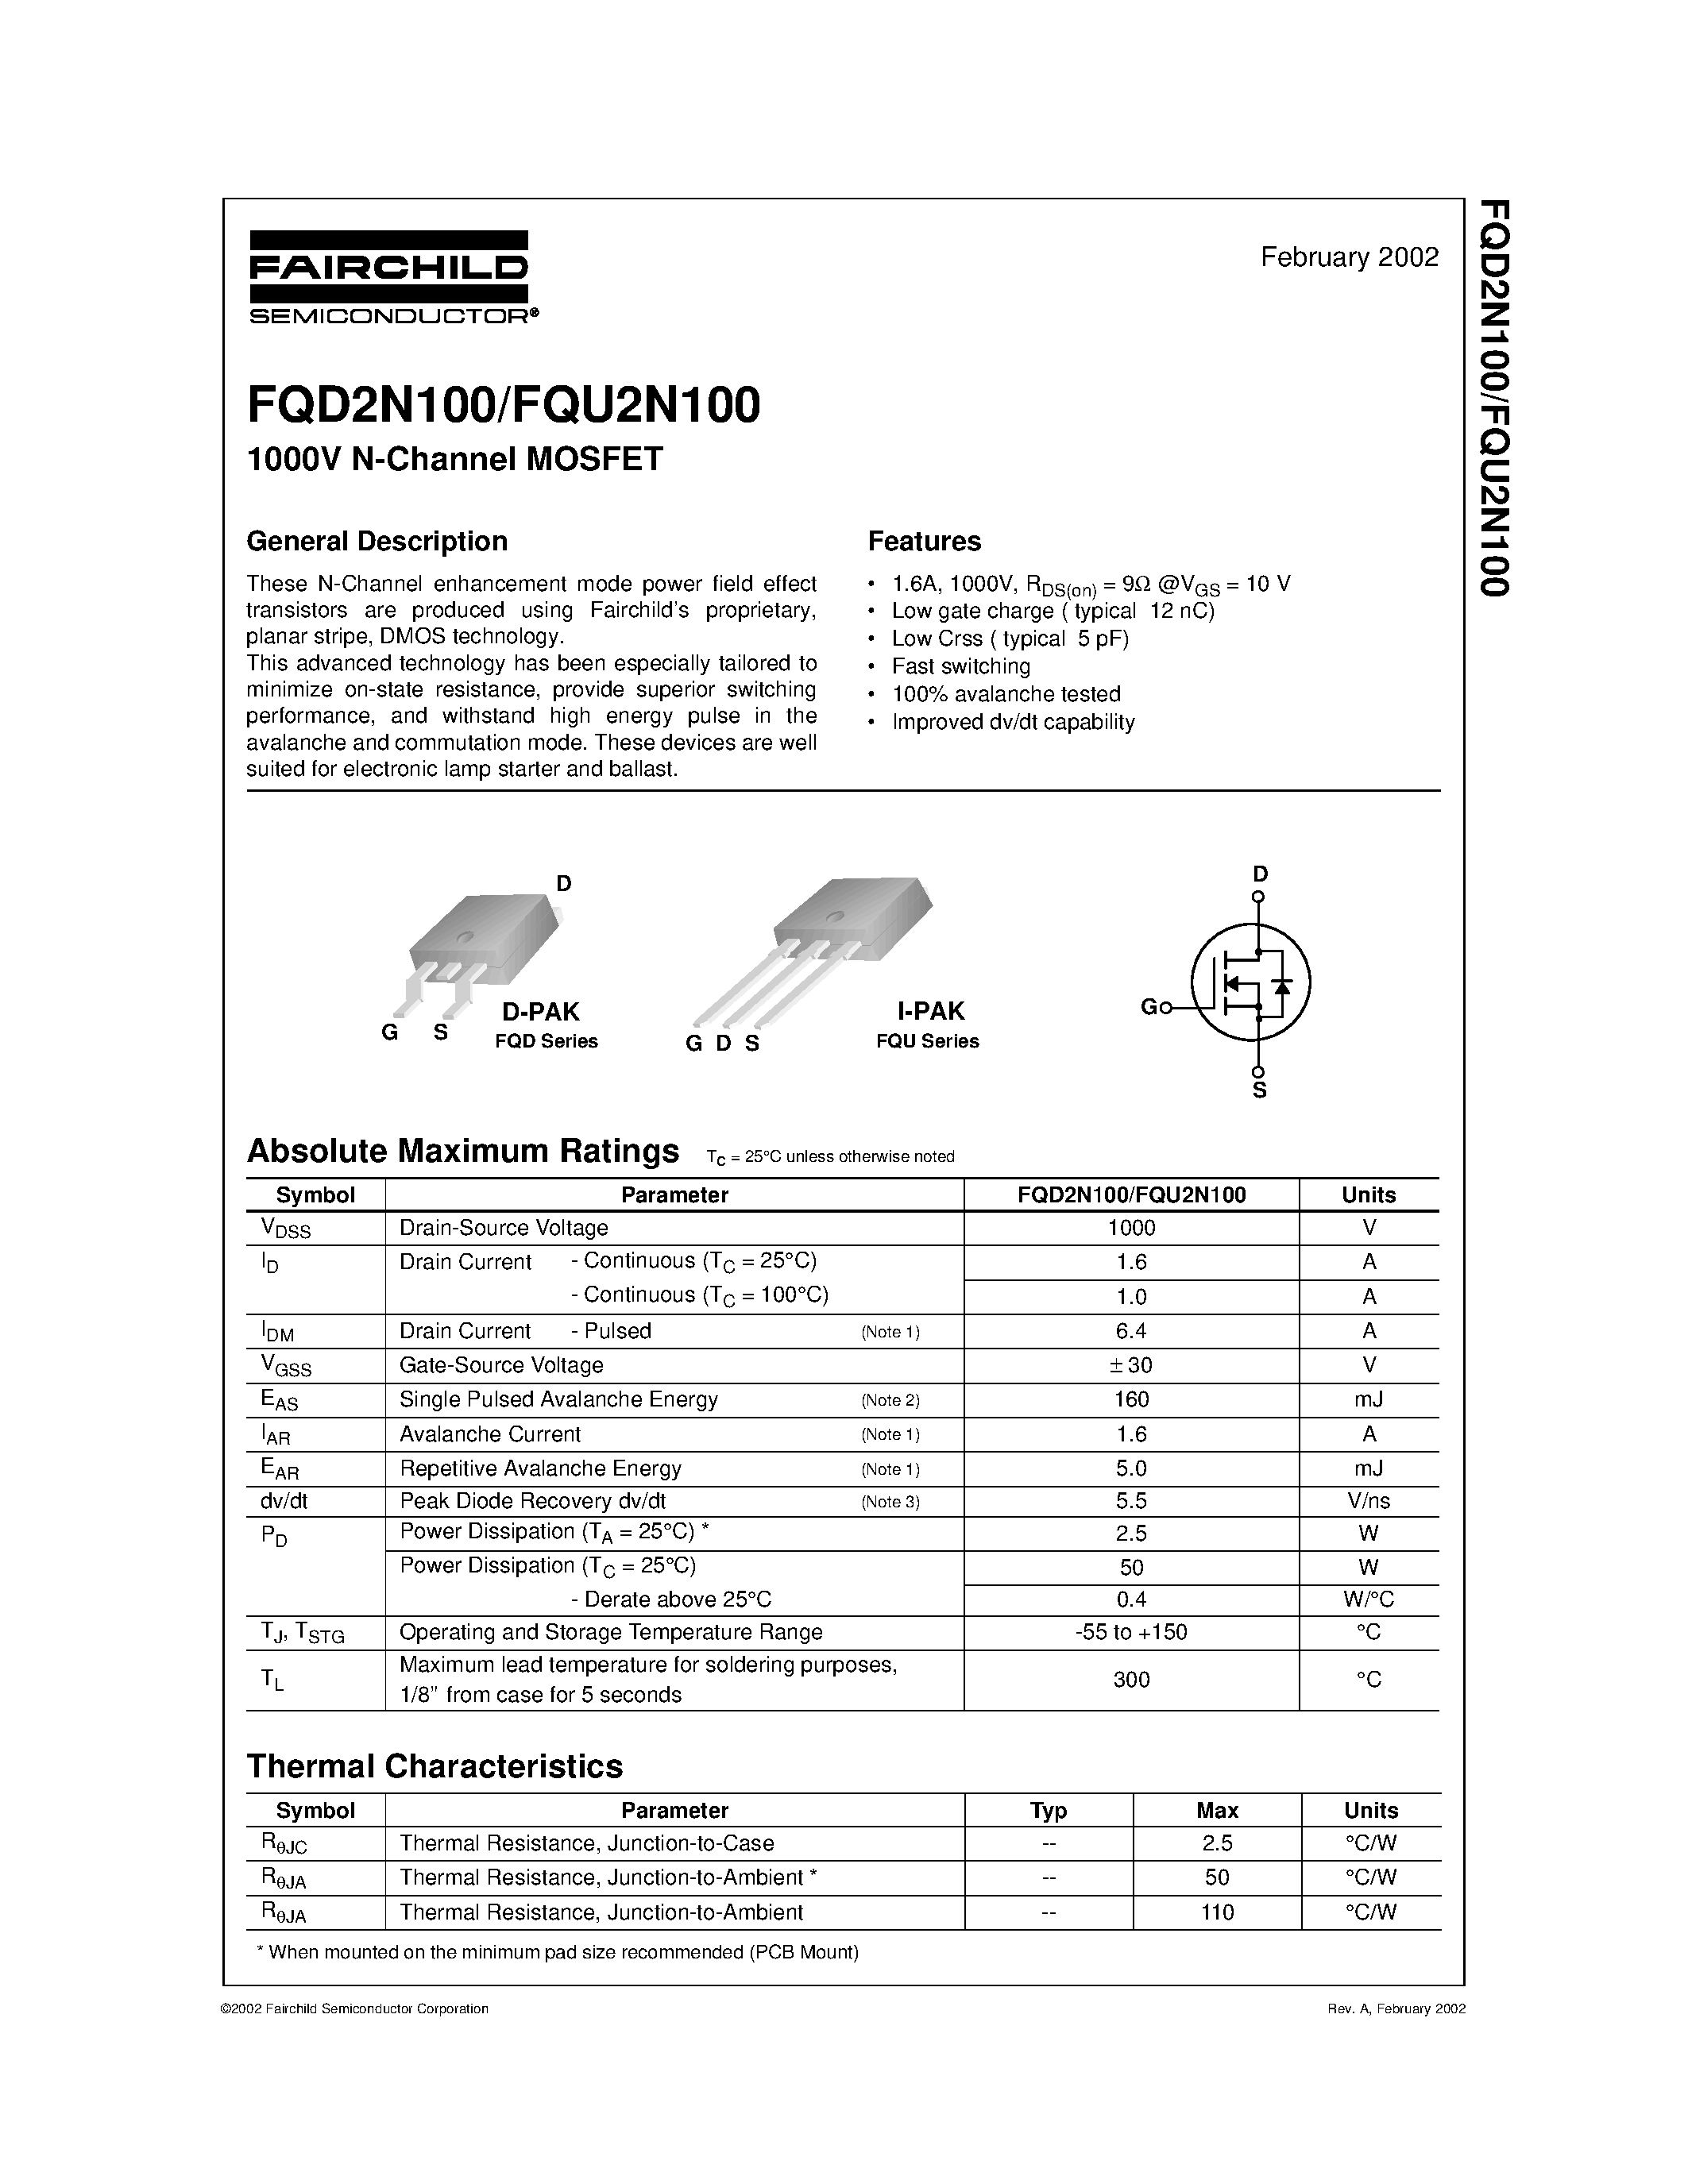 Datasheet FQD2N100 - 1000V N-Channel MOSFET page 1